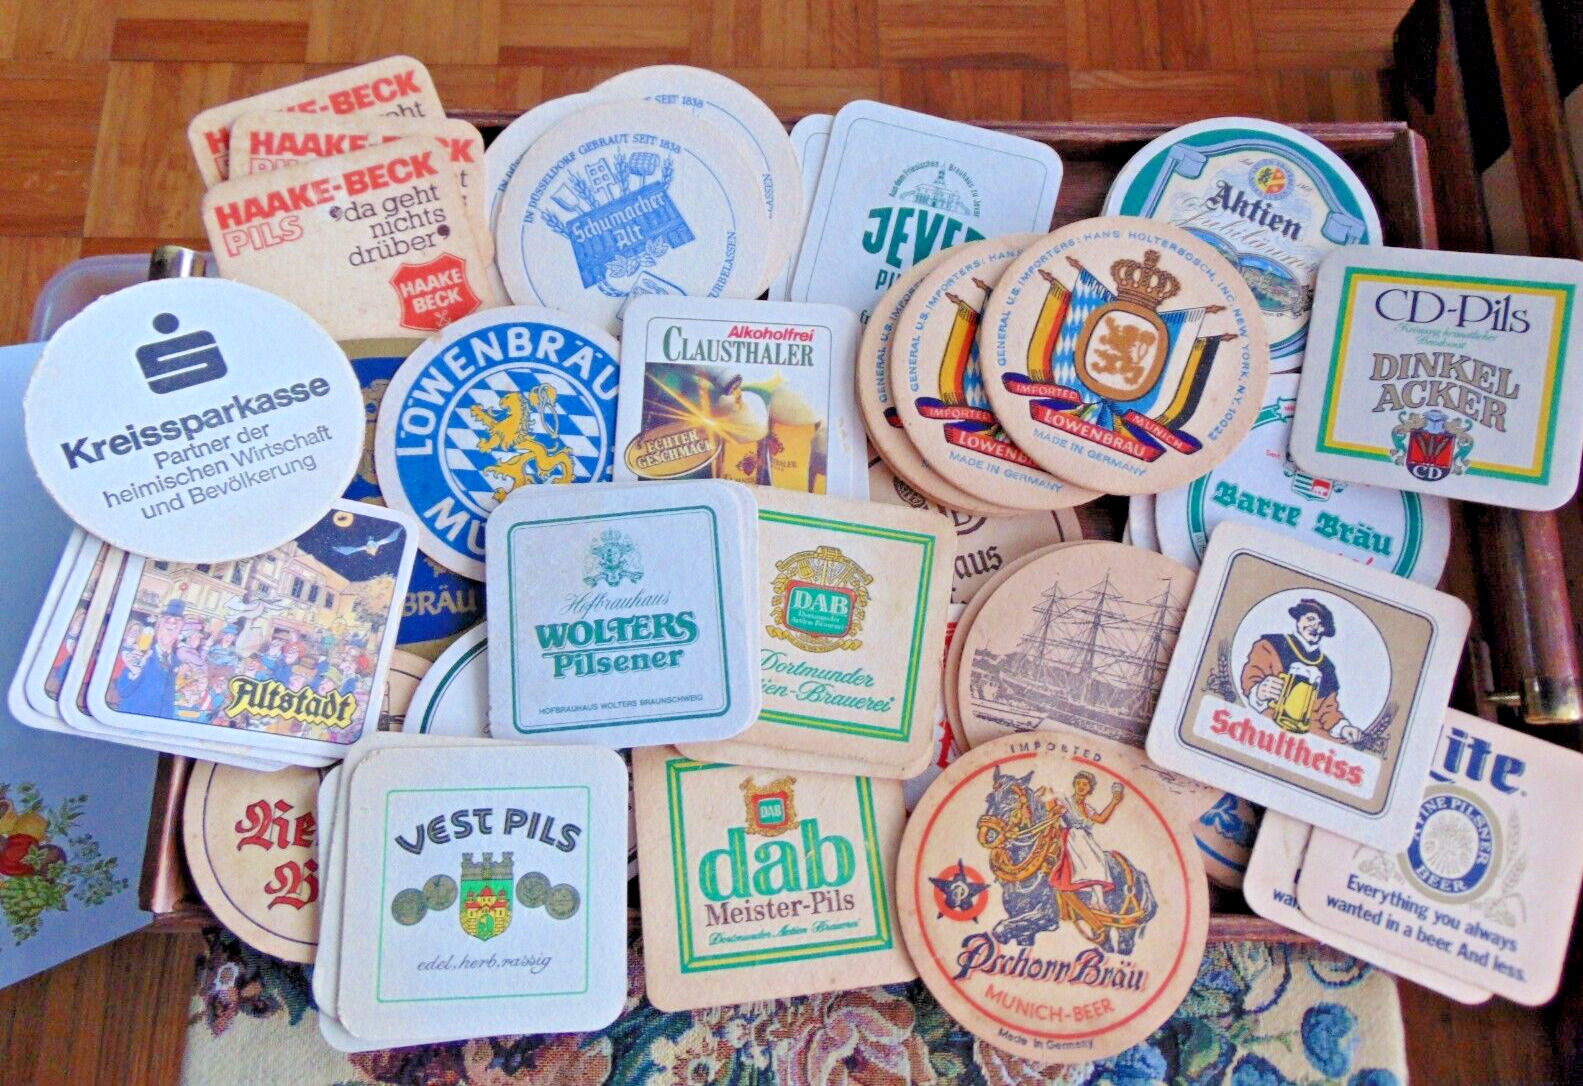 60 + LOT OF VINTAGE CARDBOARD BEER COASTERS-GERMANY-MANY DIFFERENT COMPANIES--